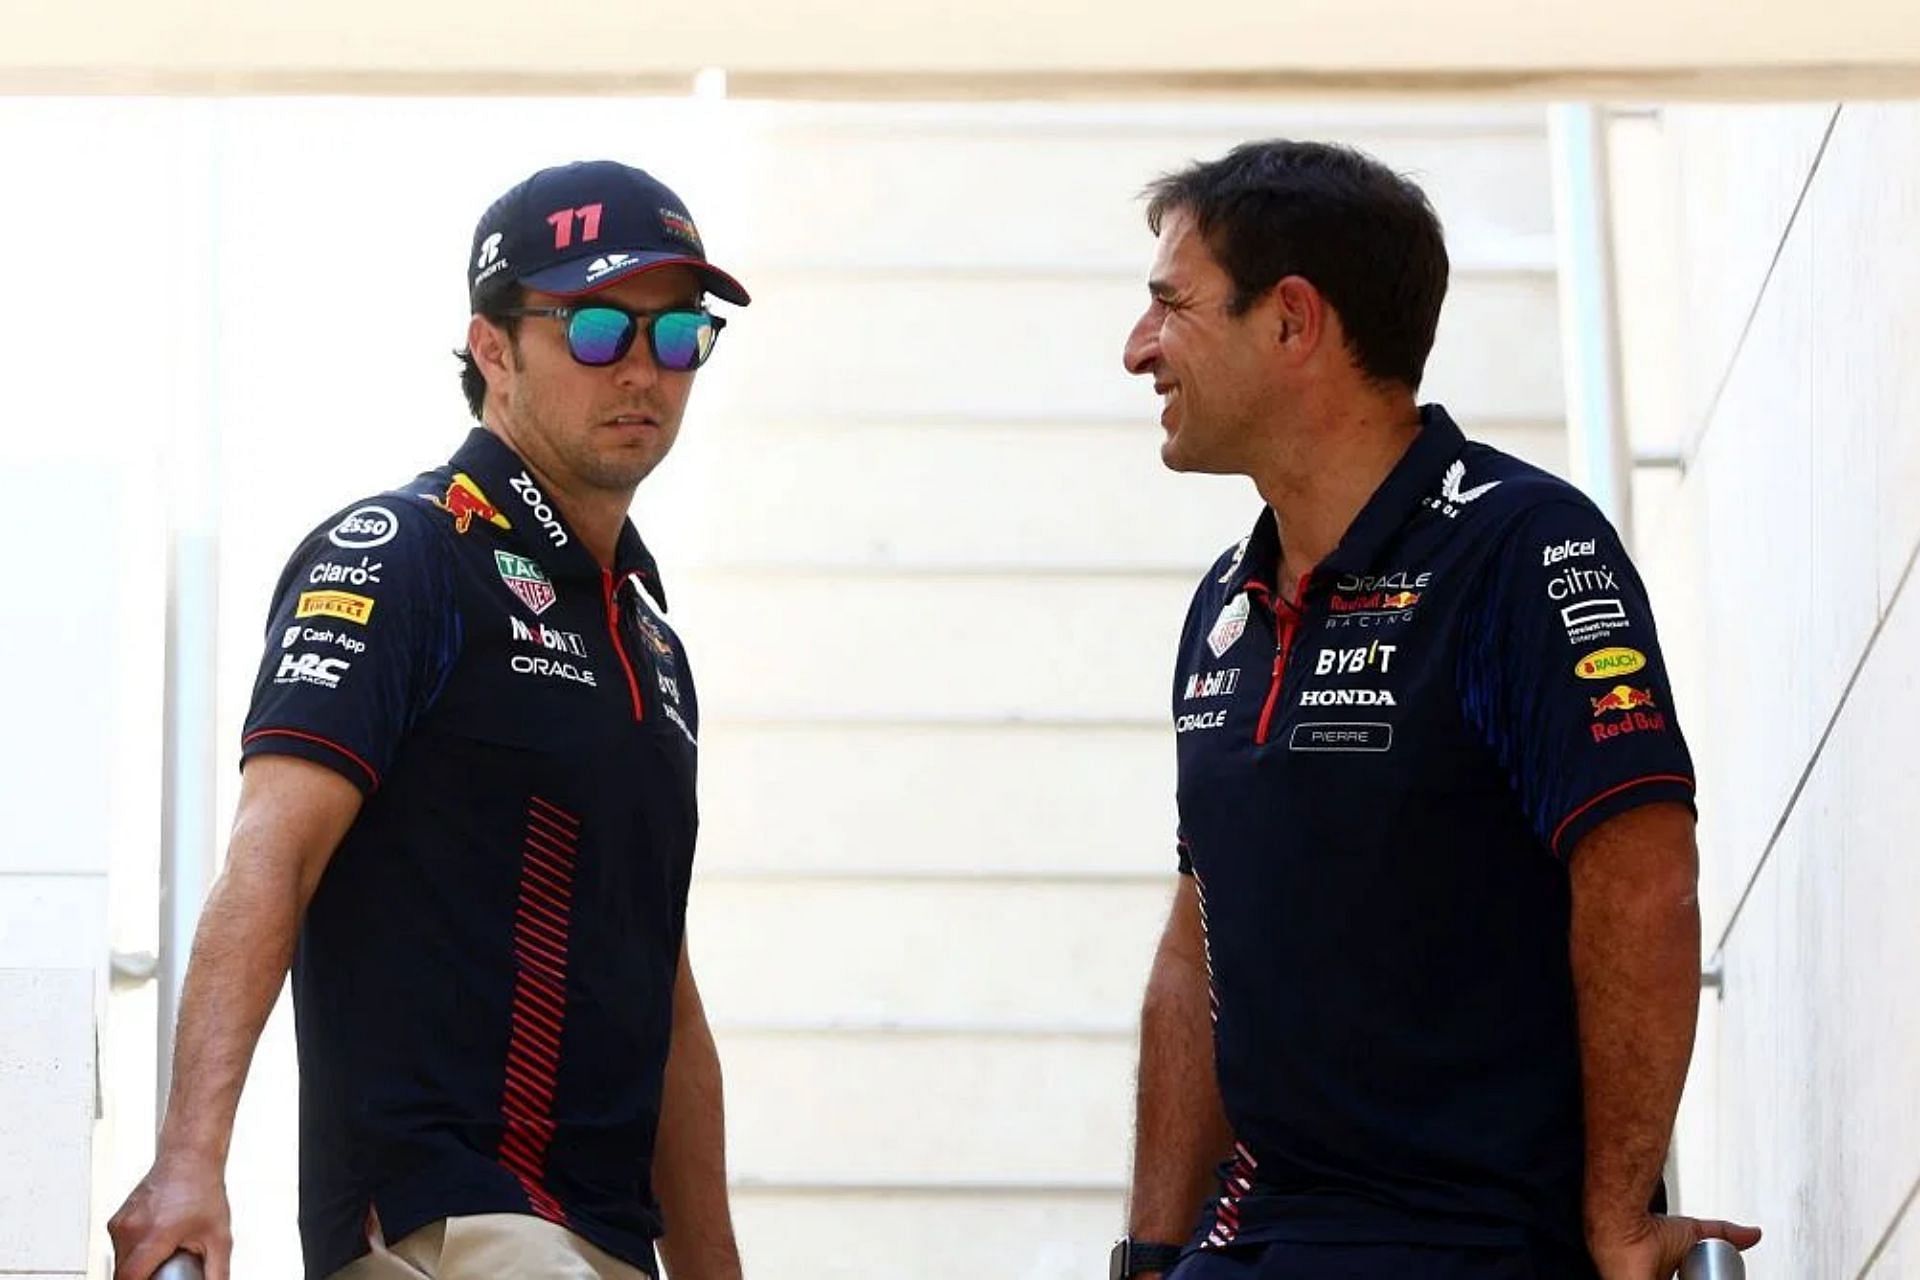 Sergio Perez talks with Pierre Wache at Red Bull Racing in the paddock prior to practice ahead of the 2023 F1 Qatar Grand Prix. (Photo by Clive Rose/Getty Images)